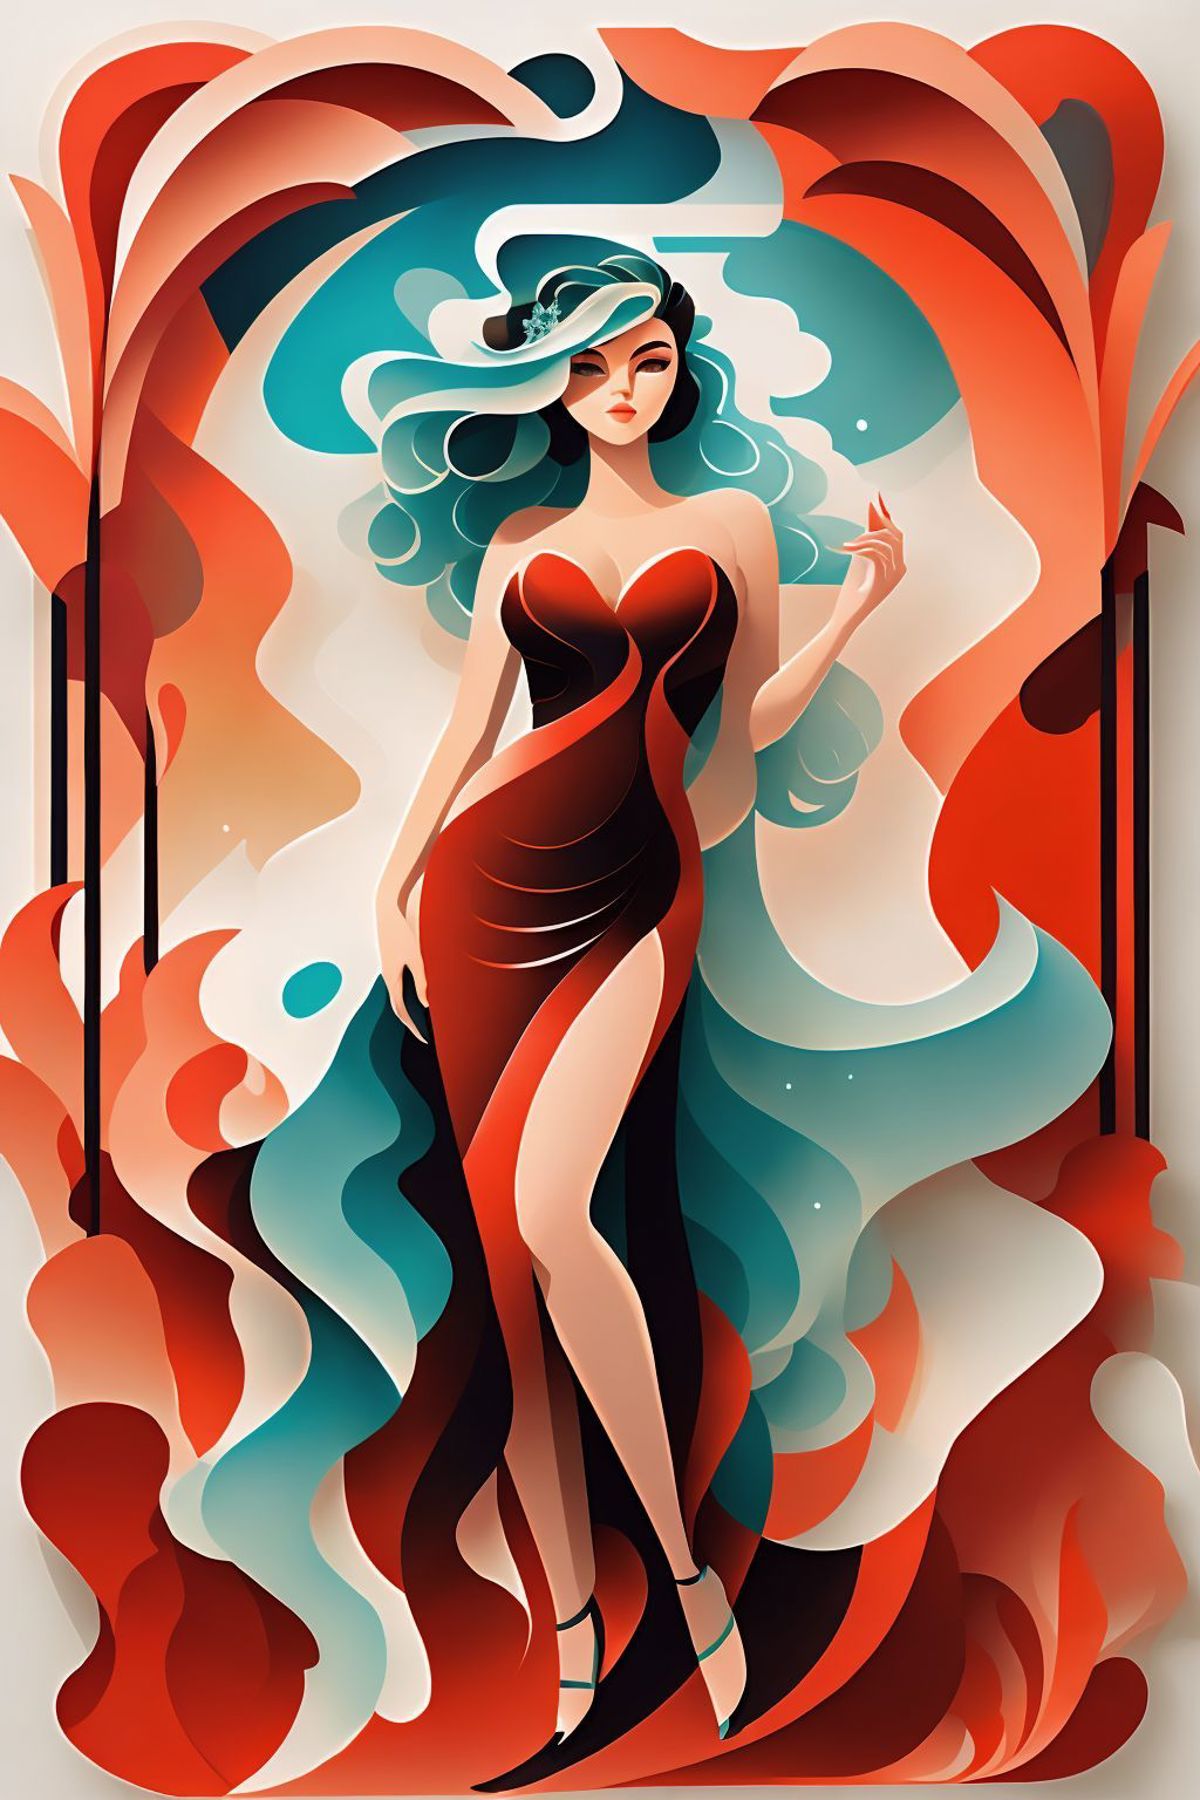 A colorful illustration of a woman in a red dress.